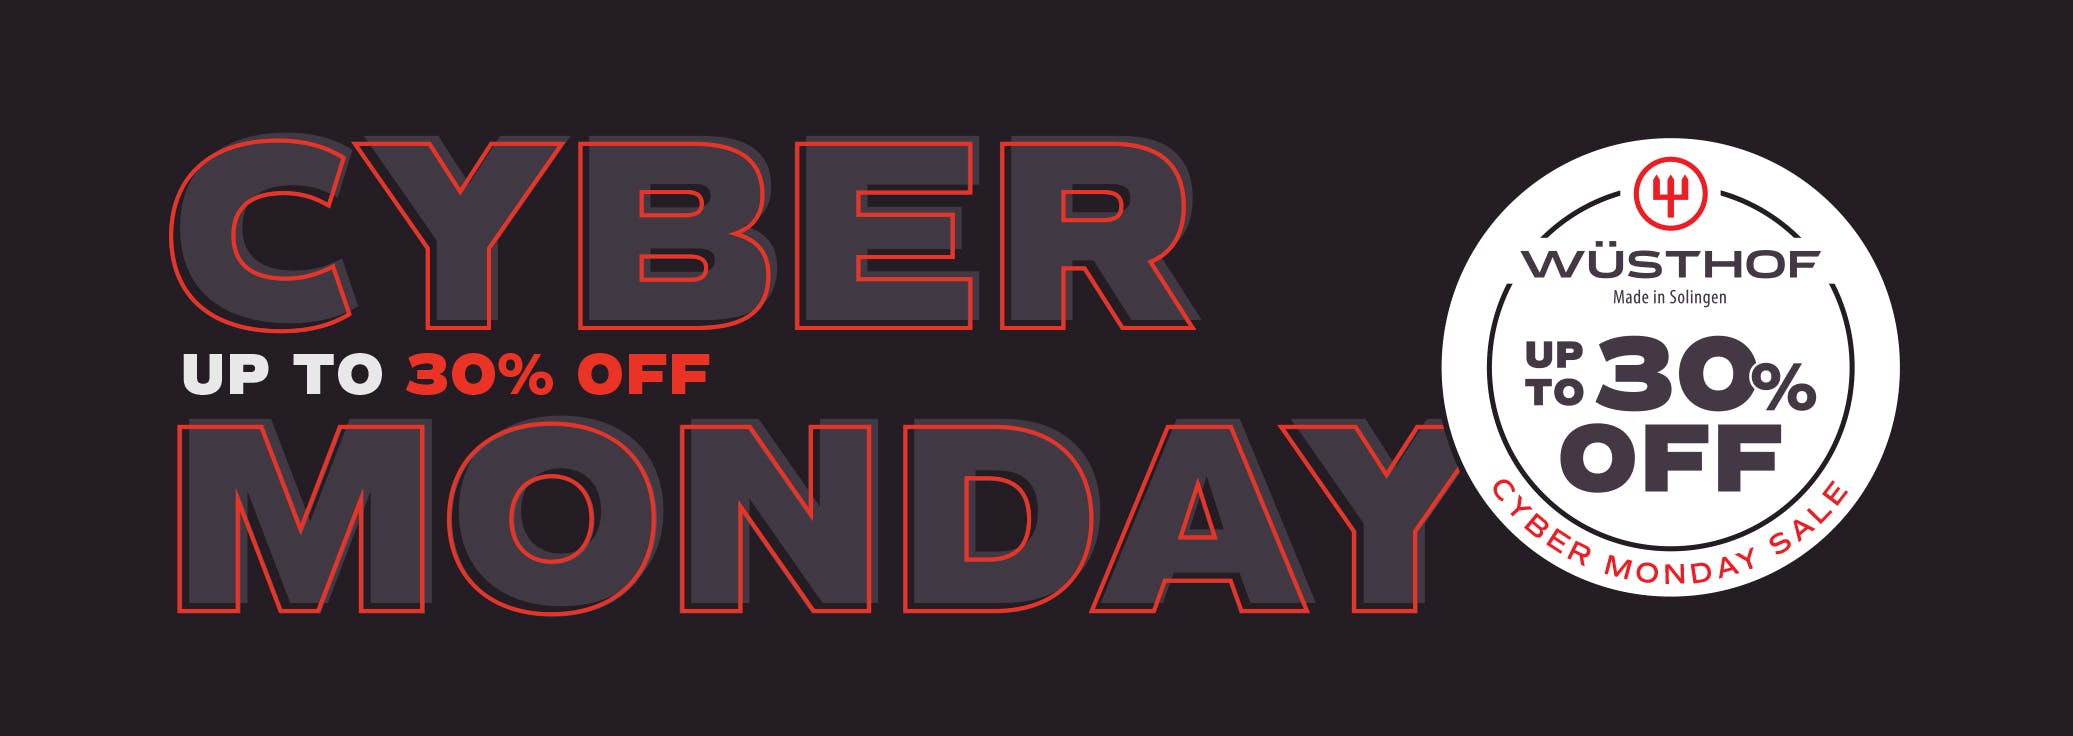 Cyber Monday up to 30% off